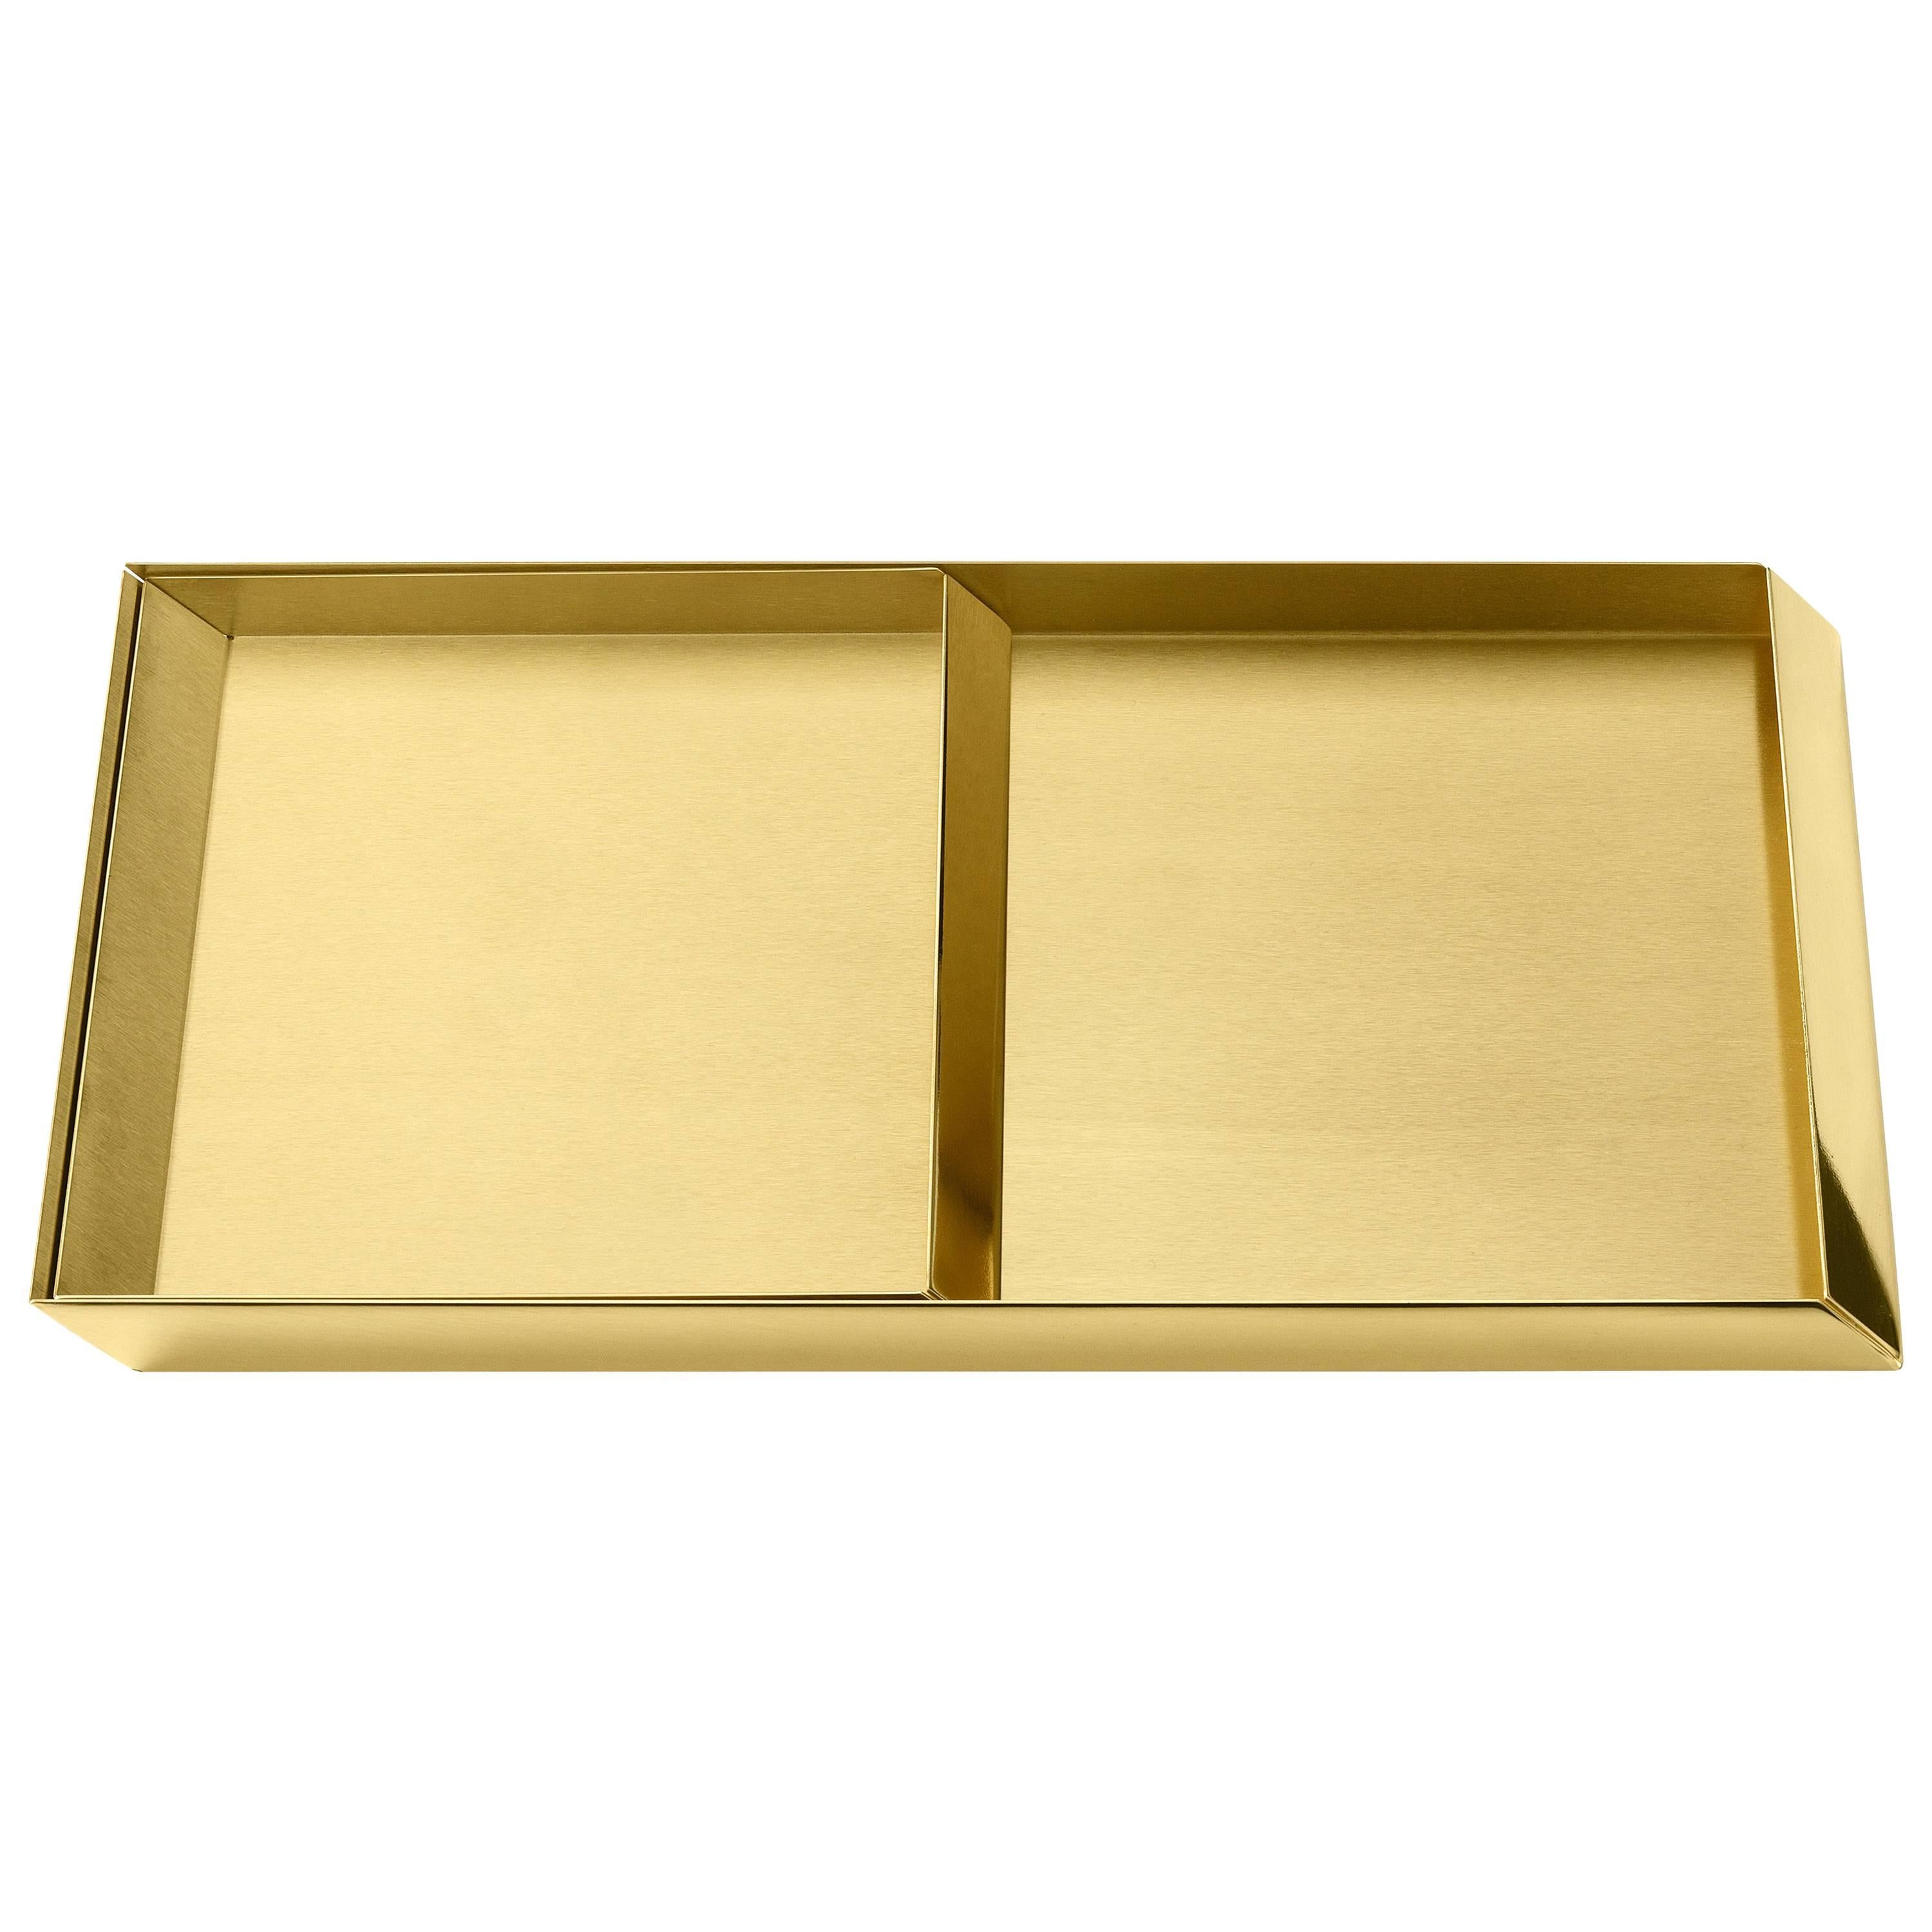 Ghidini 1961 Axonometry Trays Set in Polished Brass For Sale